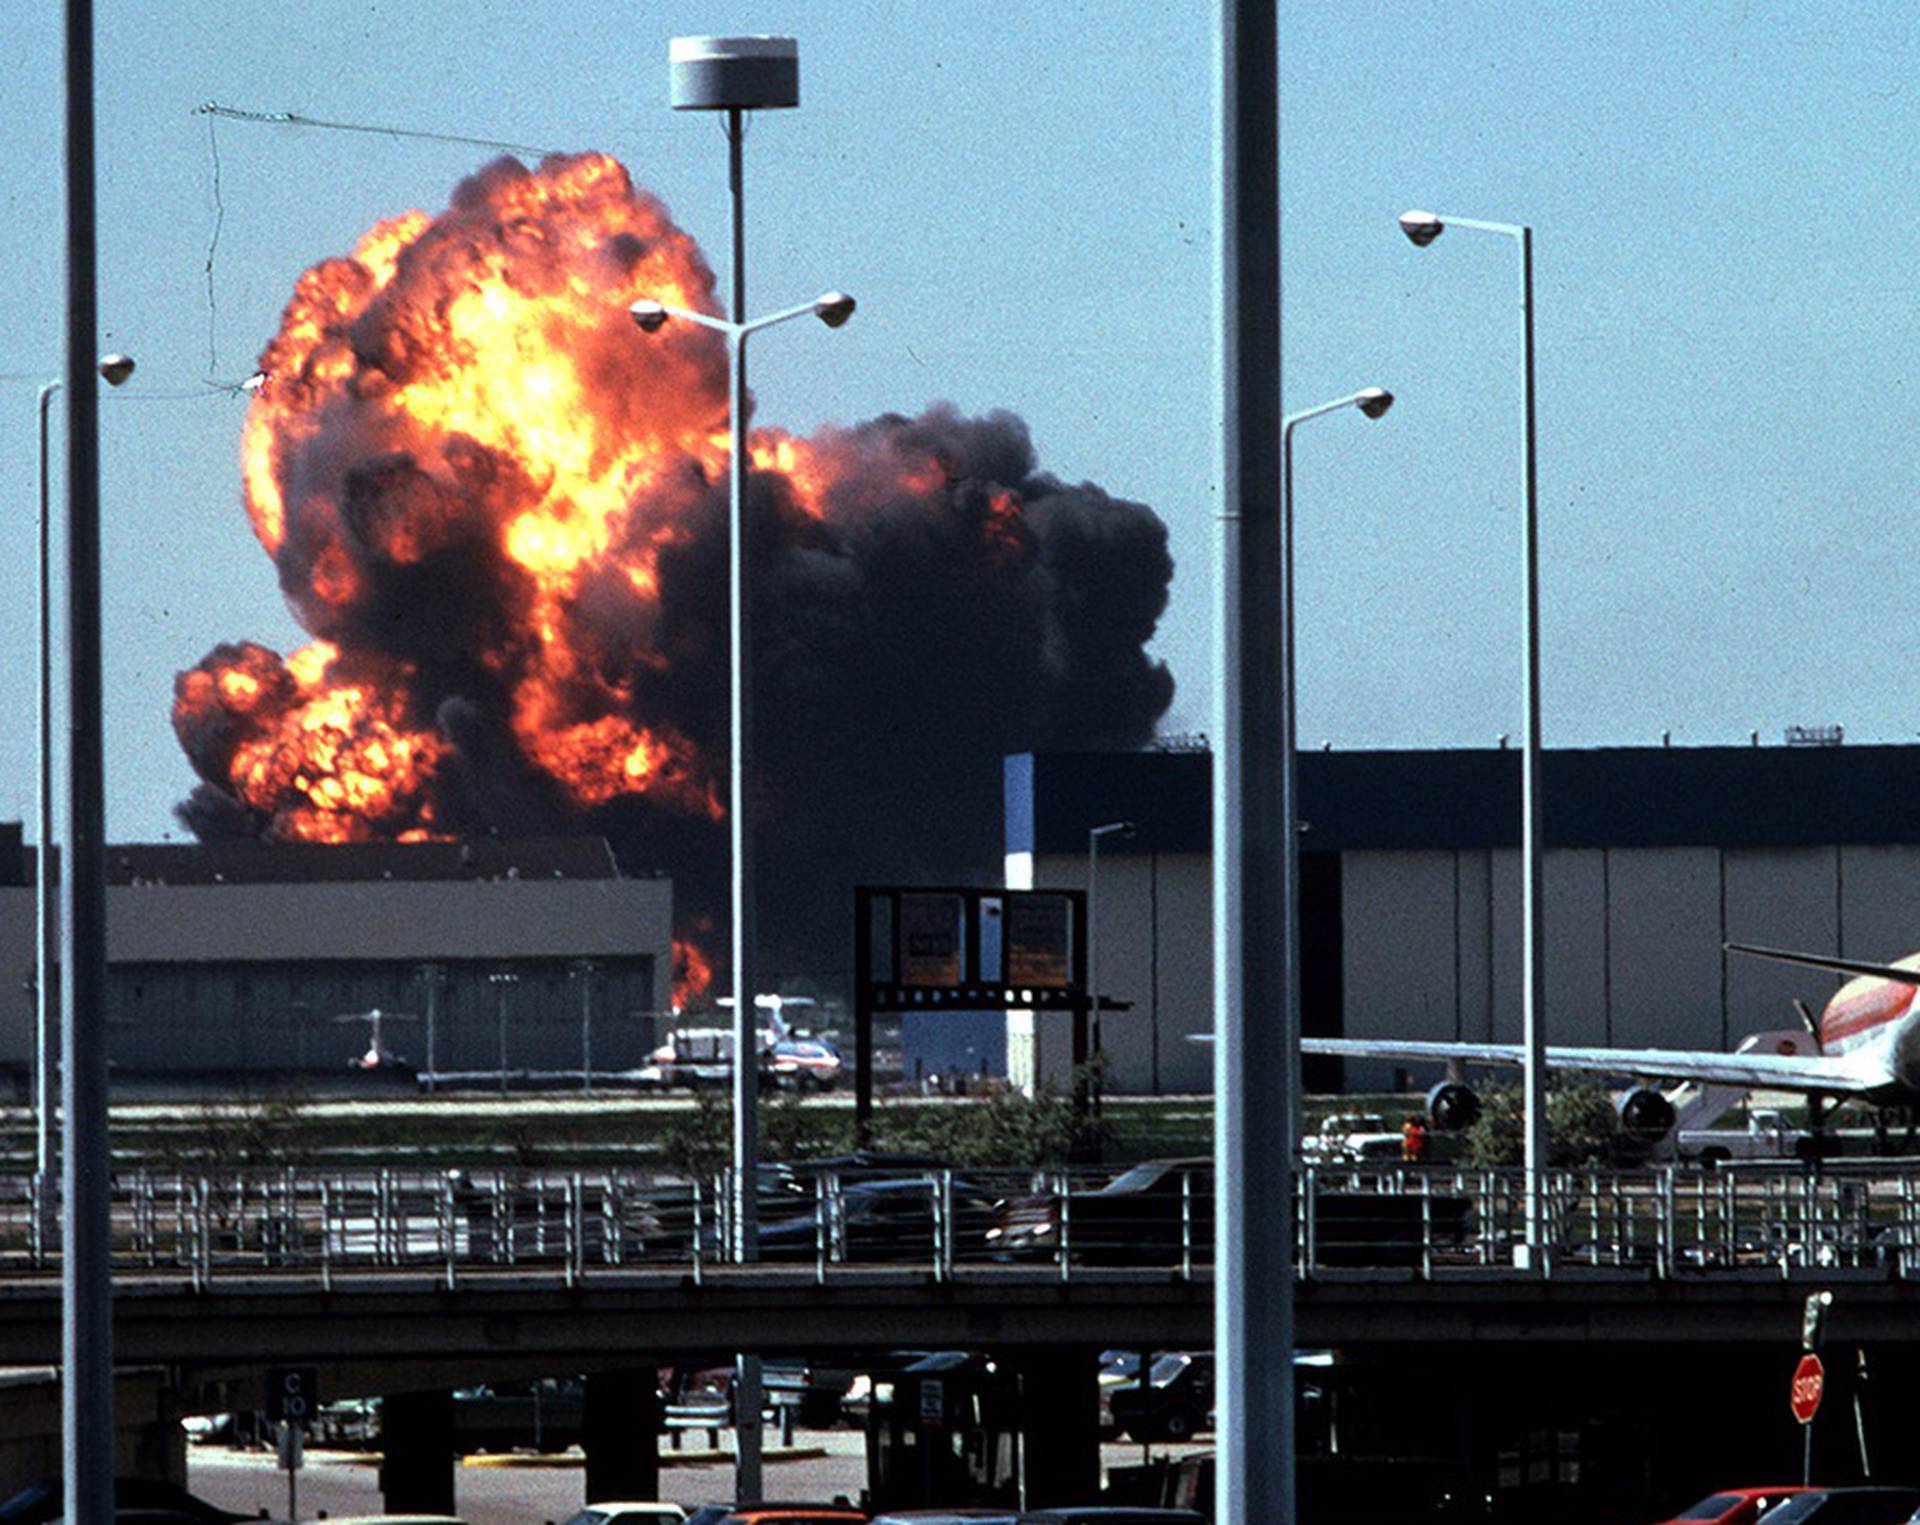 When an engine ripped off a DC-10 at O’Hare it killed 273 people, and changed air travel forever